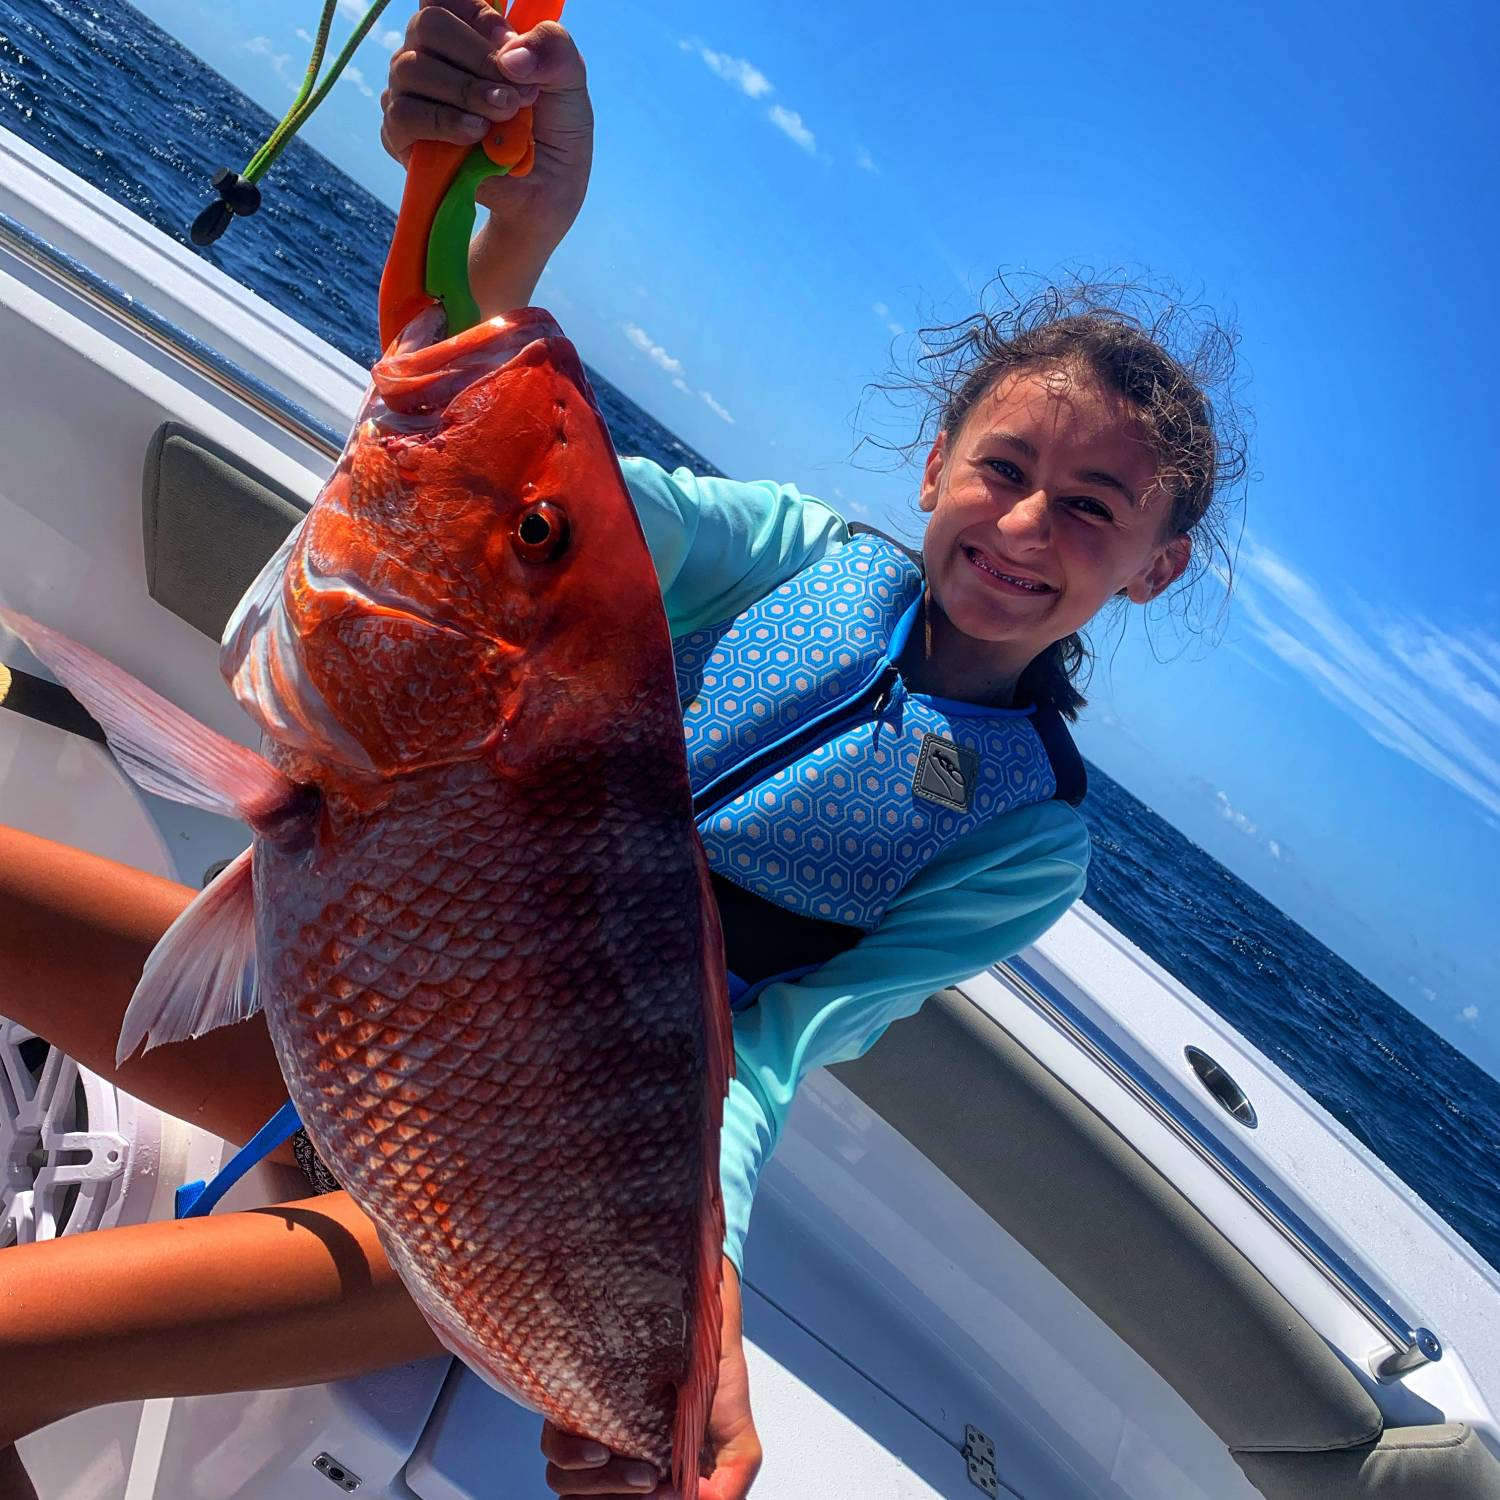 Title: She thinks we’re just fishing. - On board their Sportsman Open 212 Center Console - Location: Orange Beach Alabama. Participating in the Photo Contest #SportsmanJune